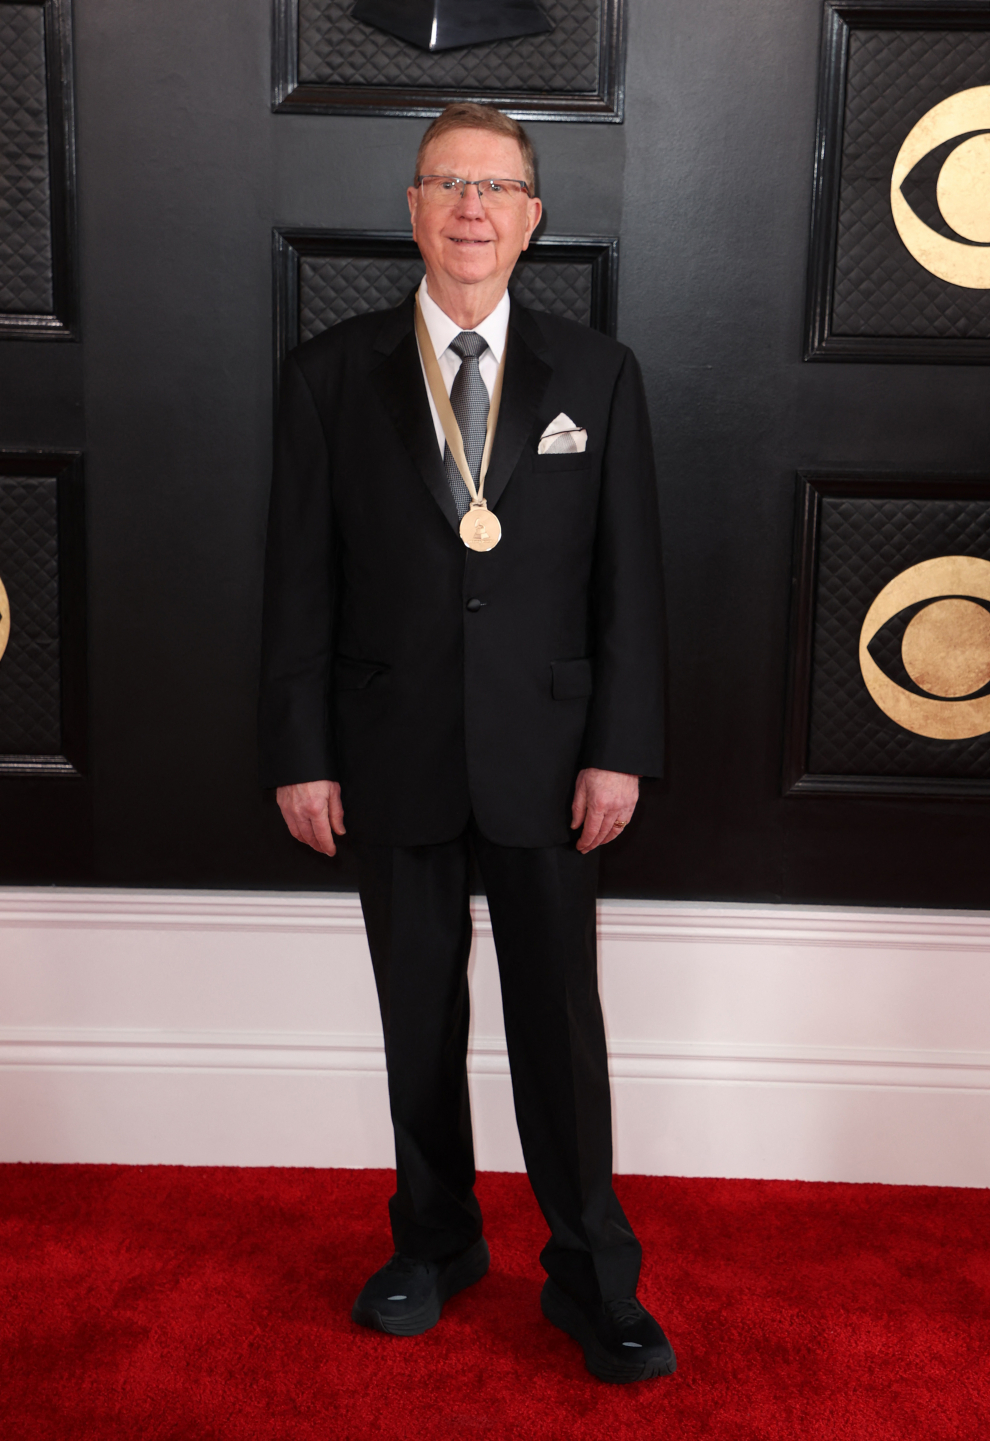 Premiere ceremony of the 65th Annual Grammy Awards in Los Angeles